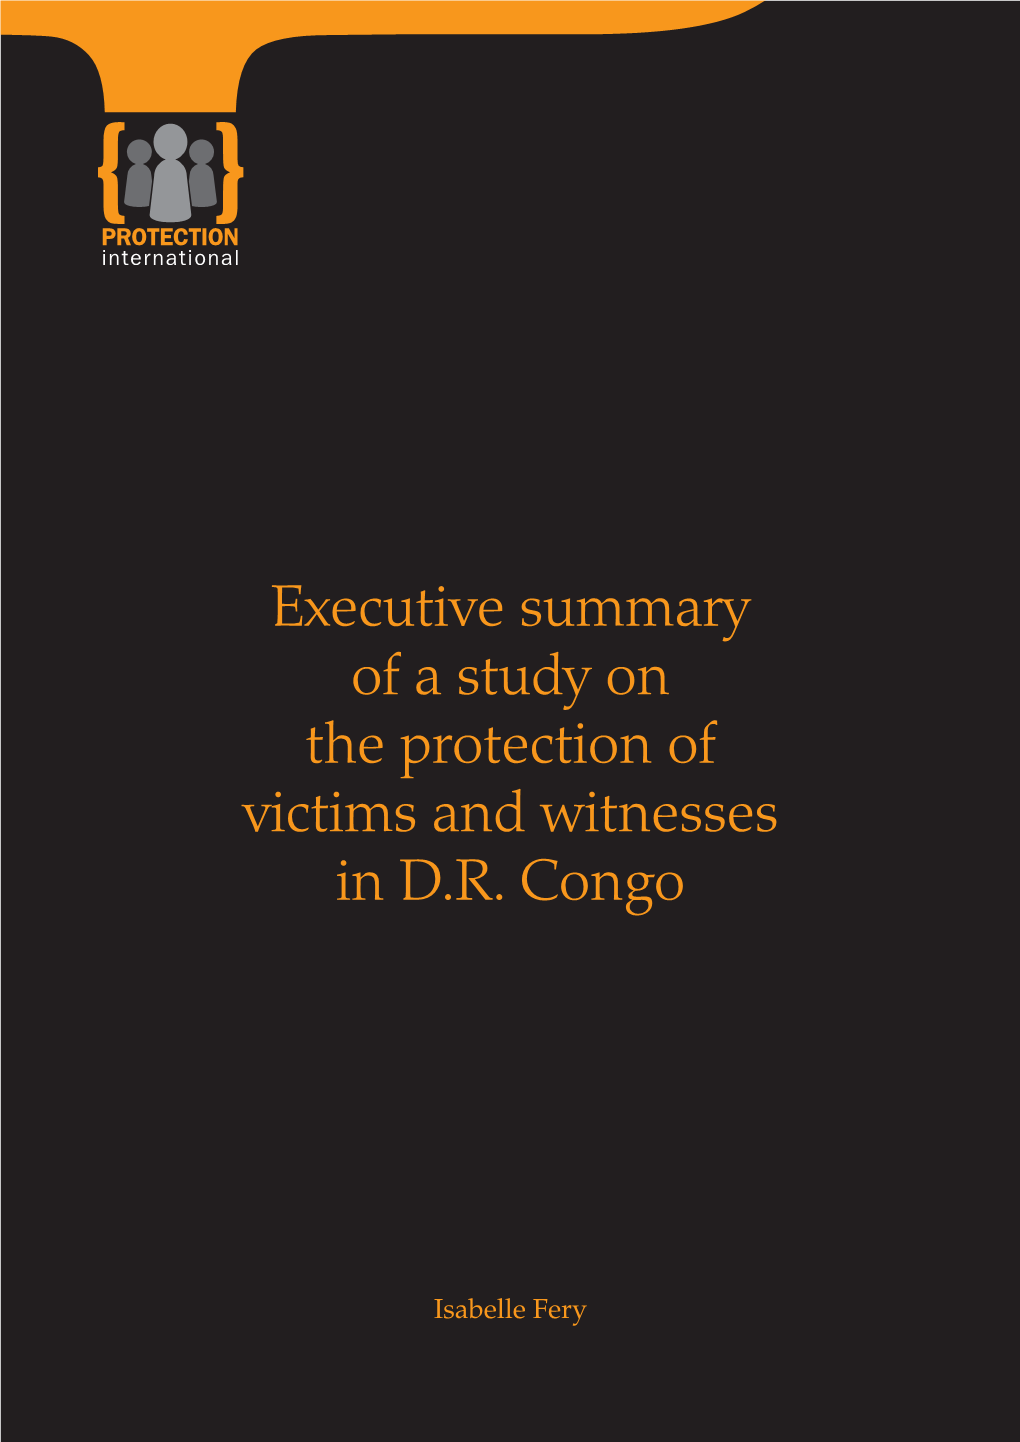 Executive Summary of a Study on the Protection of Victims and Witnesses in D.R